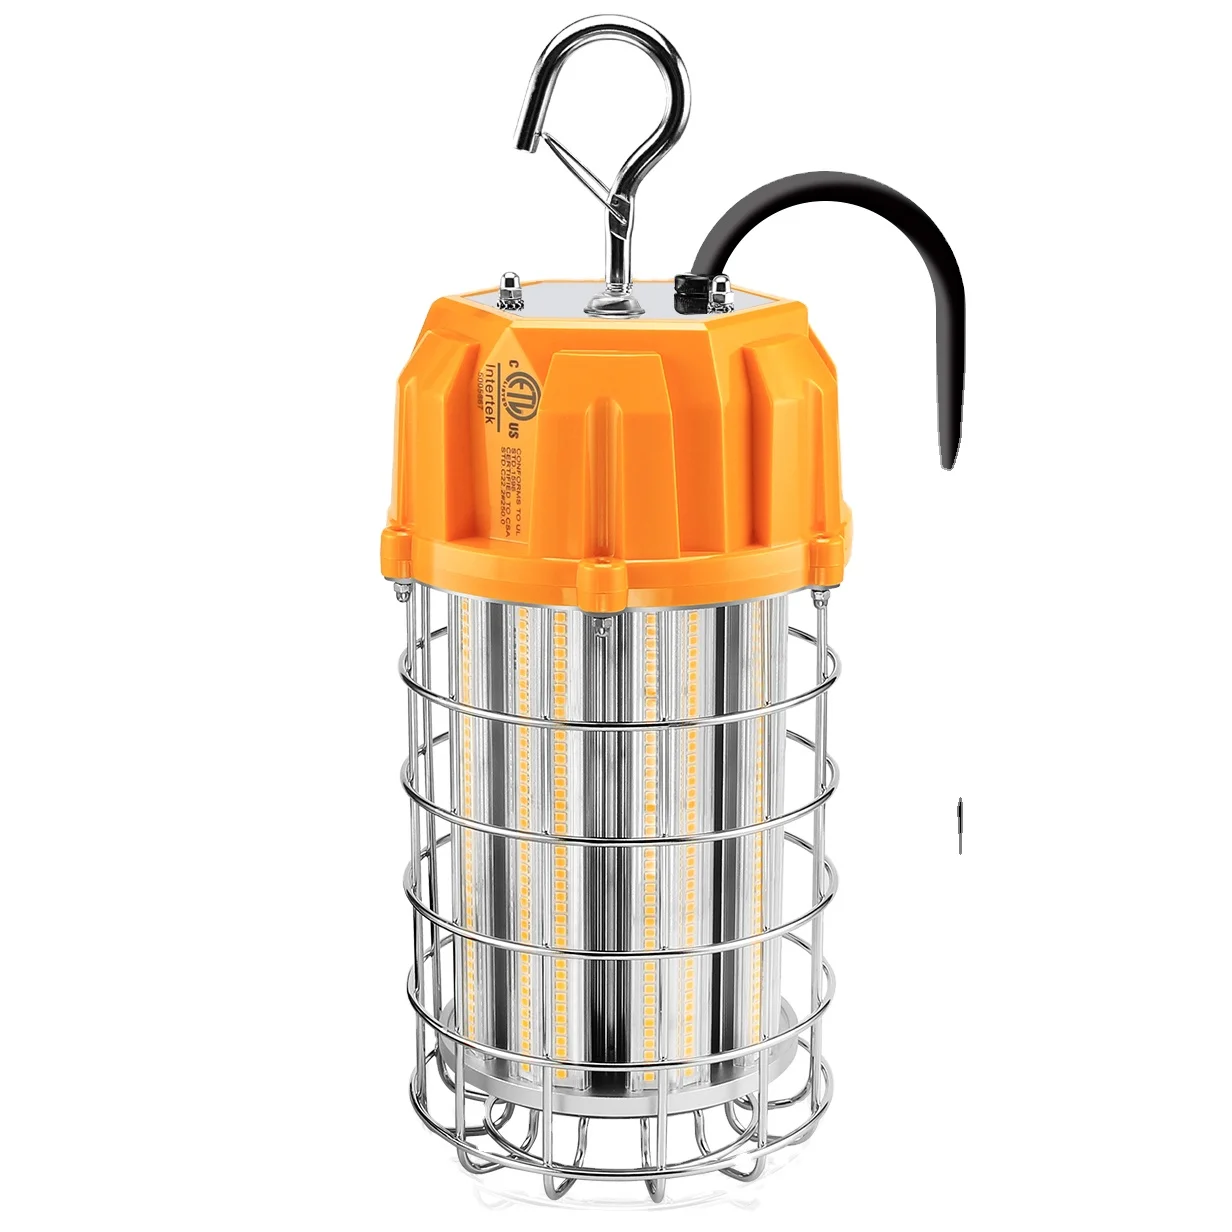 LED Temporary Construction Job Site Tunnel Work Light Hanging Portable 100W Lamp